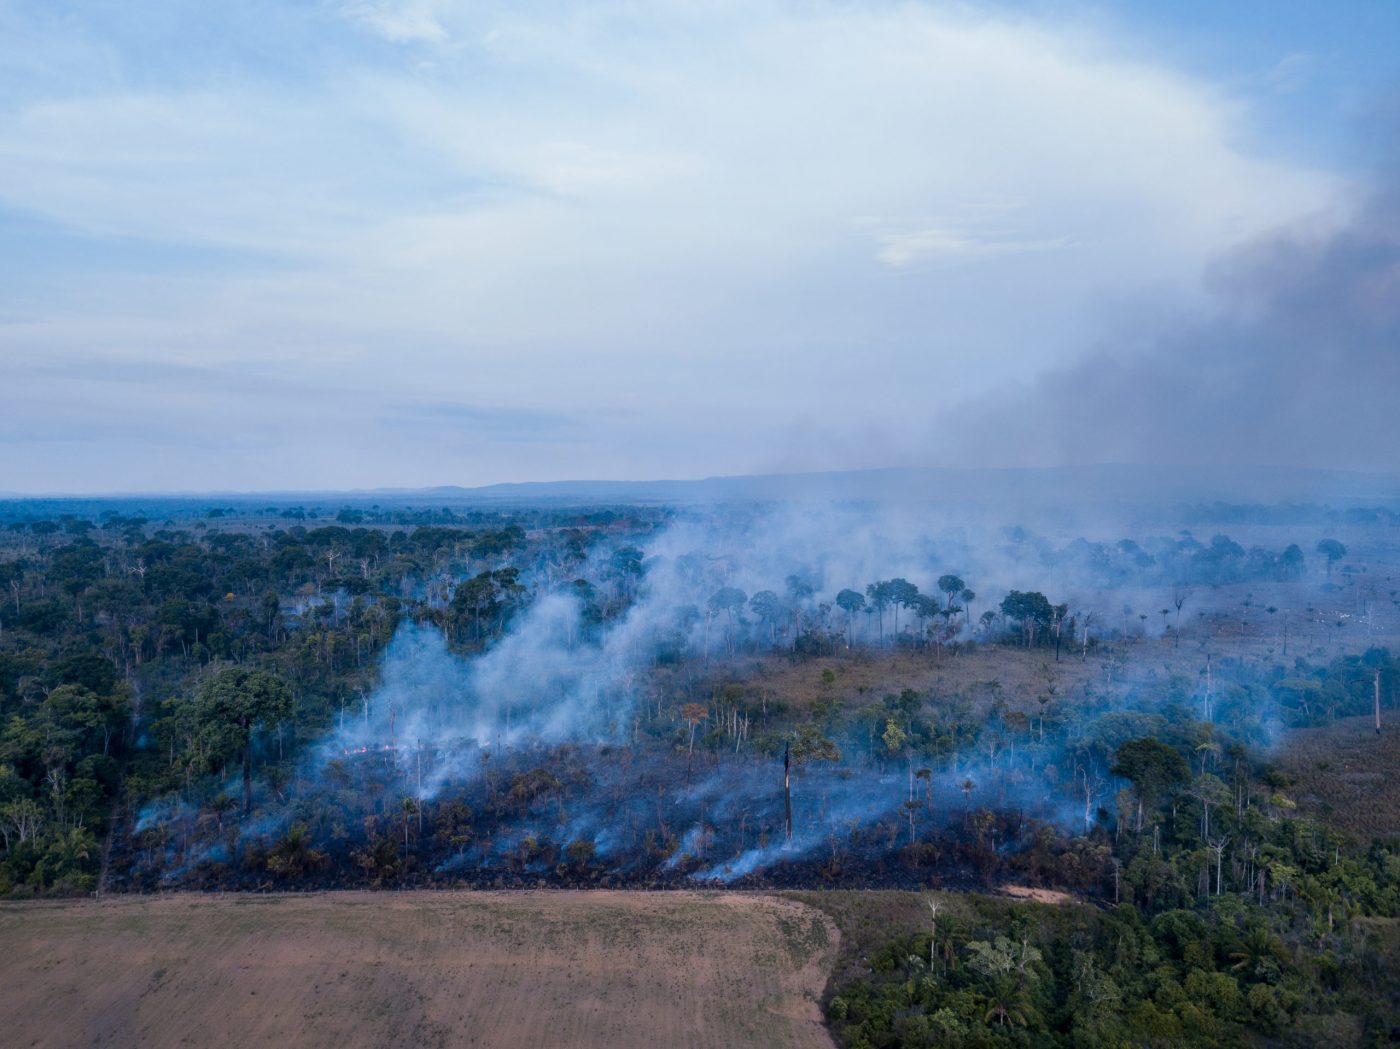 Vertical explainer photo 1 - Burning of the Amazon rainforest at dusk to increase livestock grazing area and agriculture activities Area already deforested in the foreground.